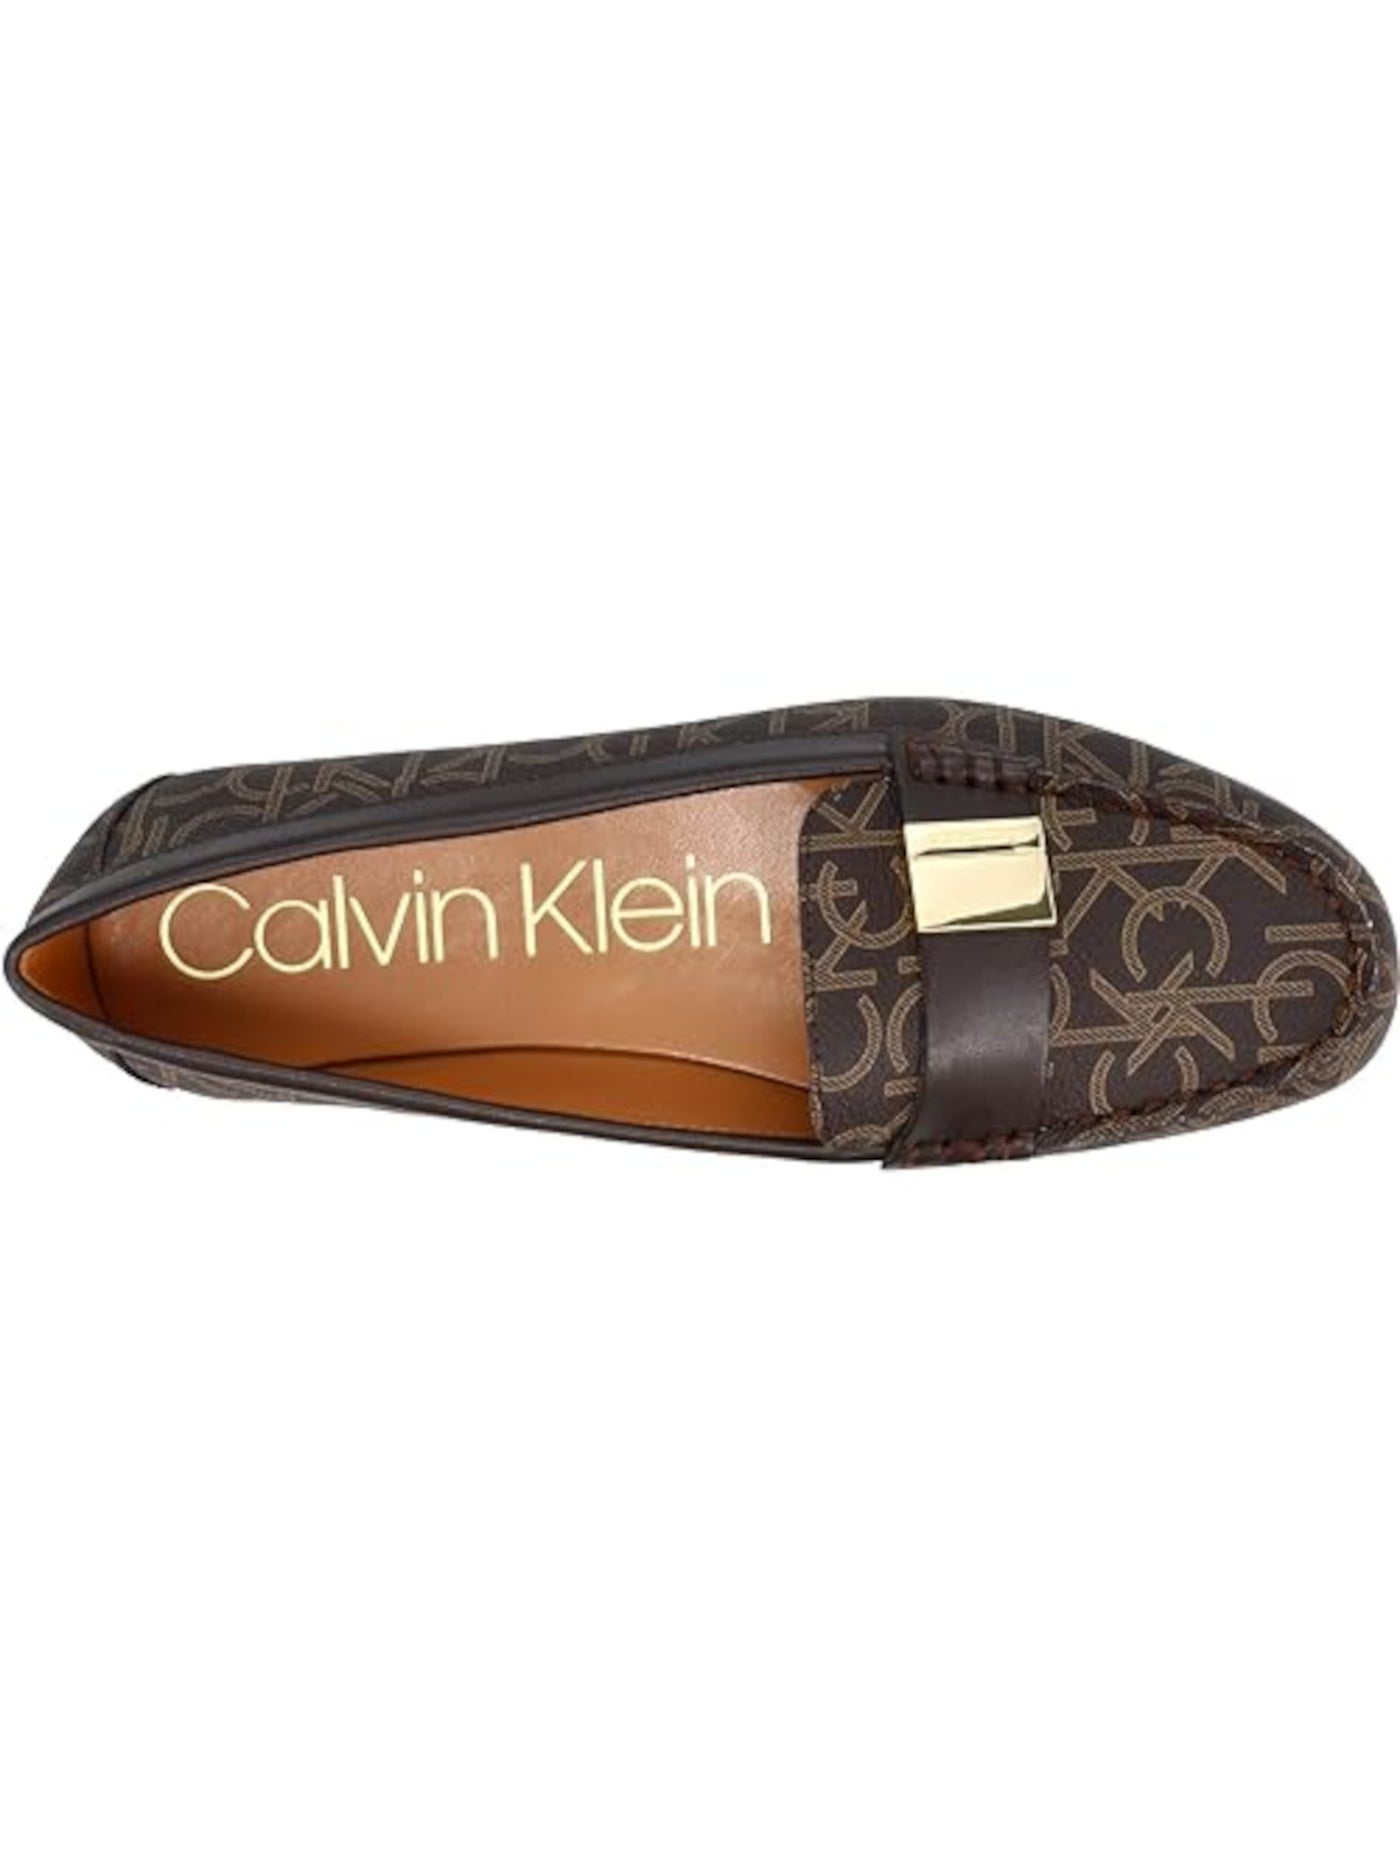 CALVIN KLEIN Womens Brown Logo Moc Toe Hardware Padded Lisa Round Toe Slip On Loafers Shoes 7 M